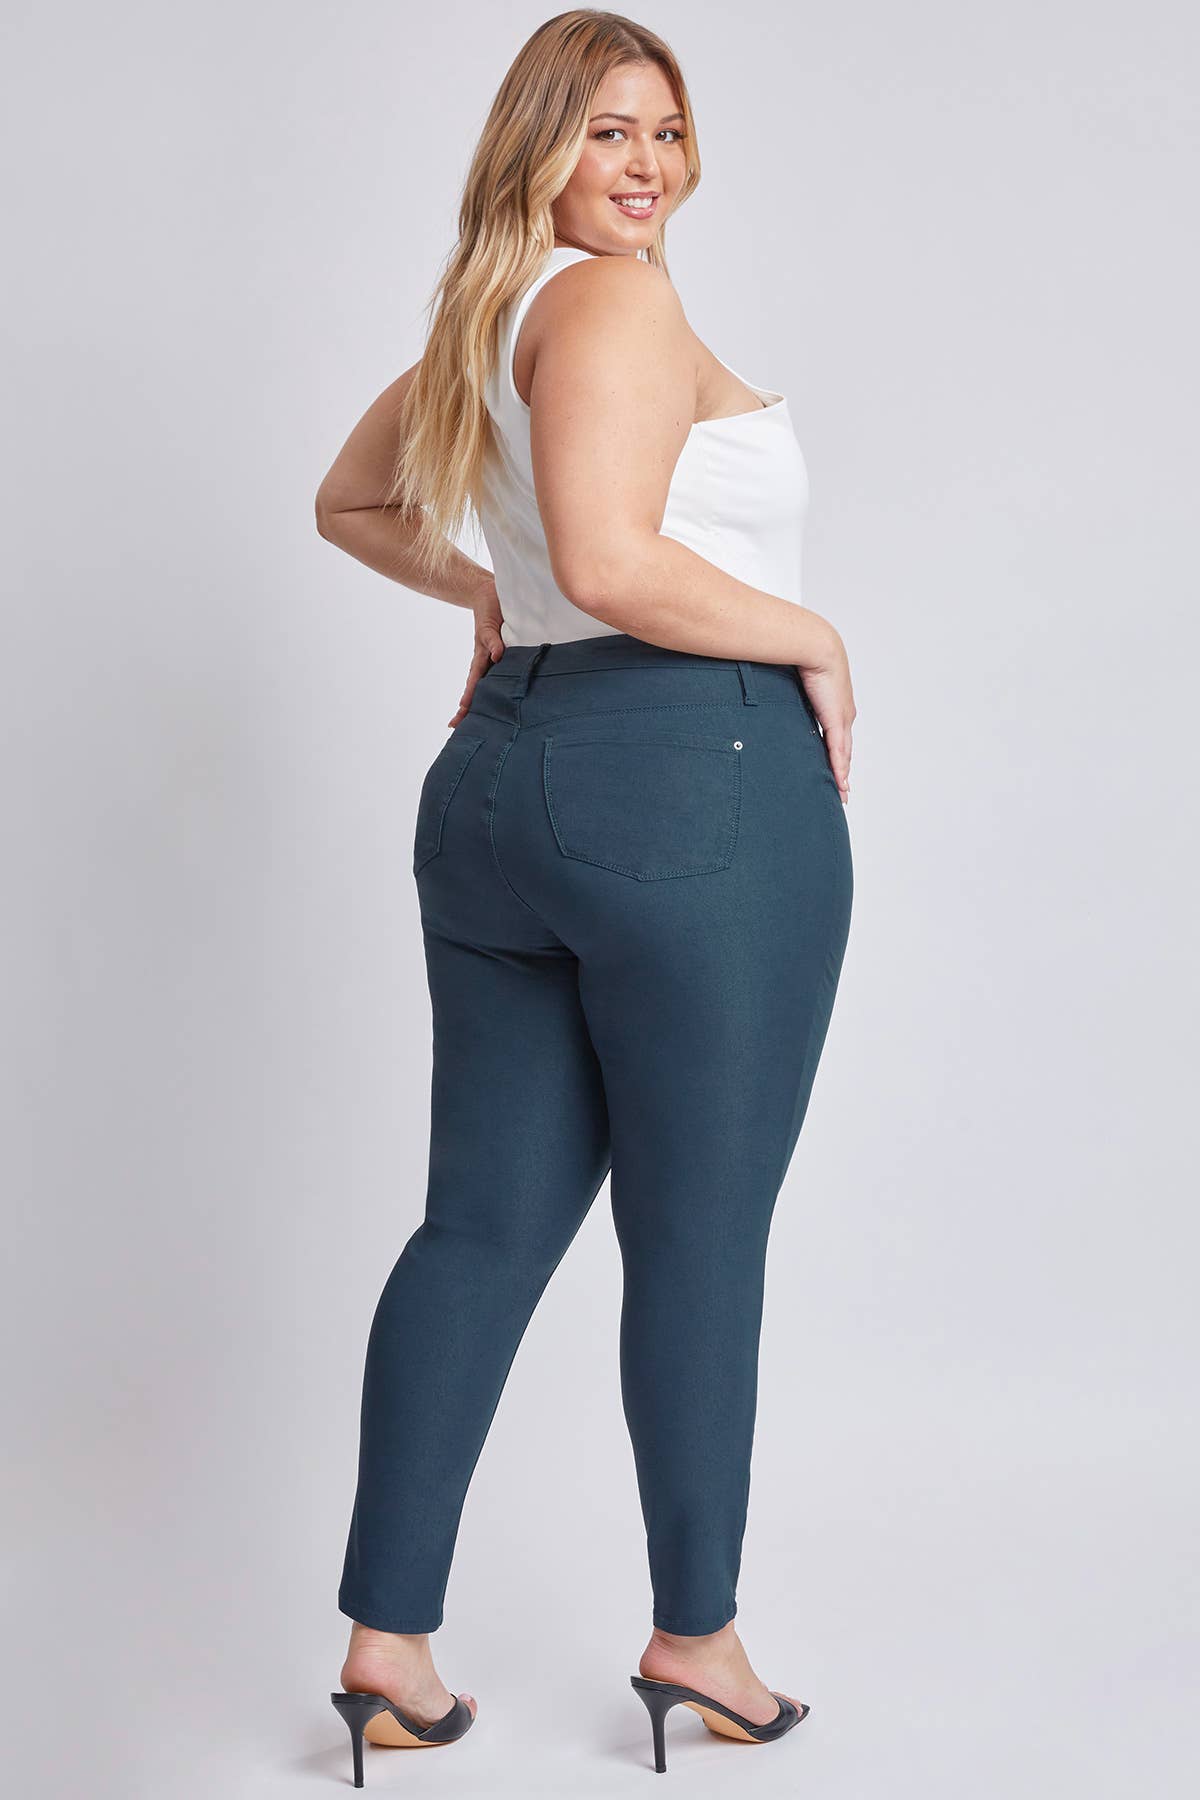 Missy Plus Size Hyperstretch Skinny Jean: Pacific Spring-Summer YMI